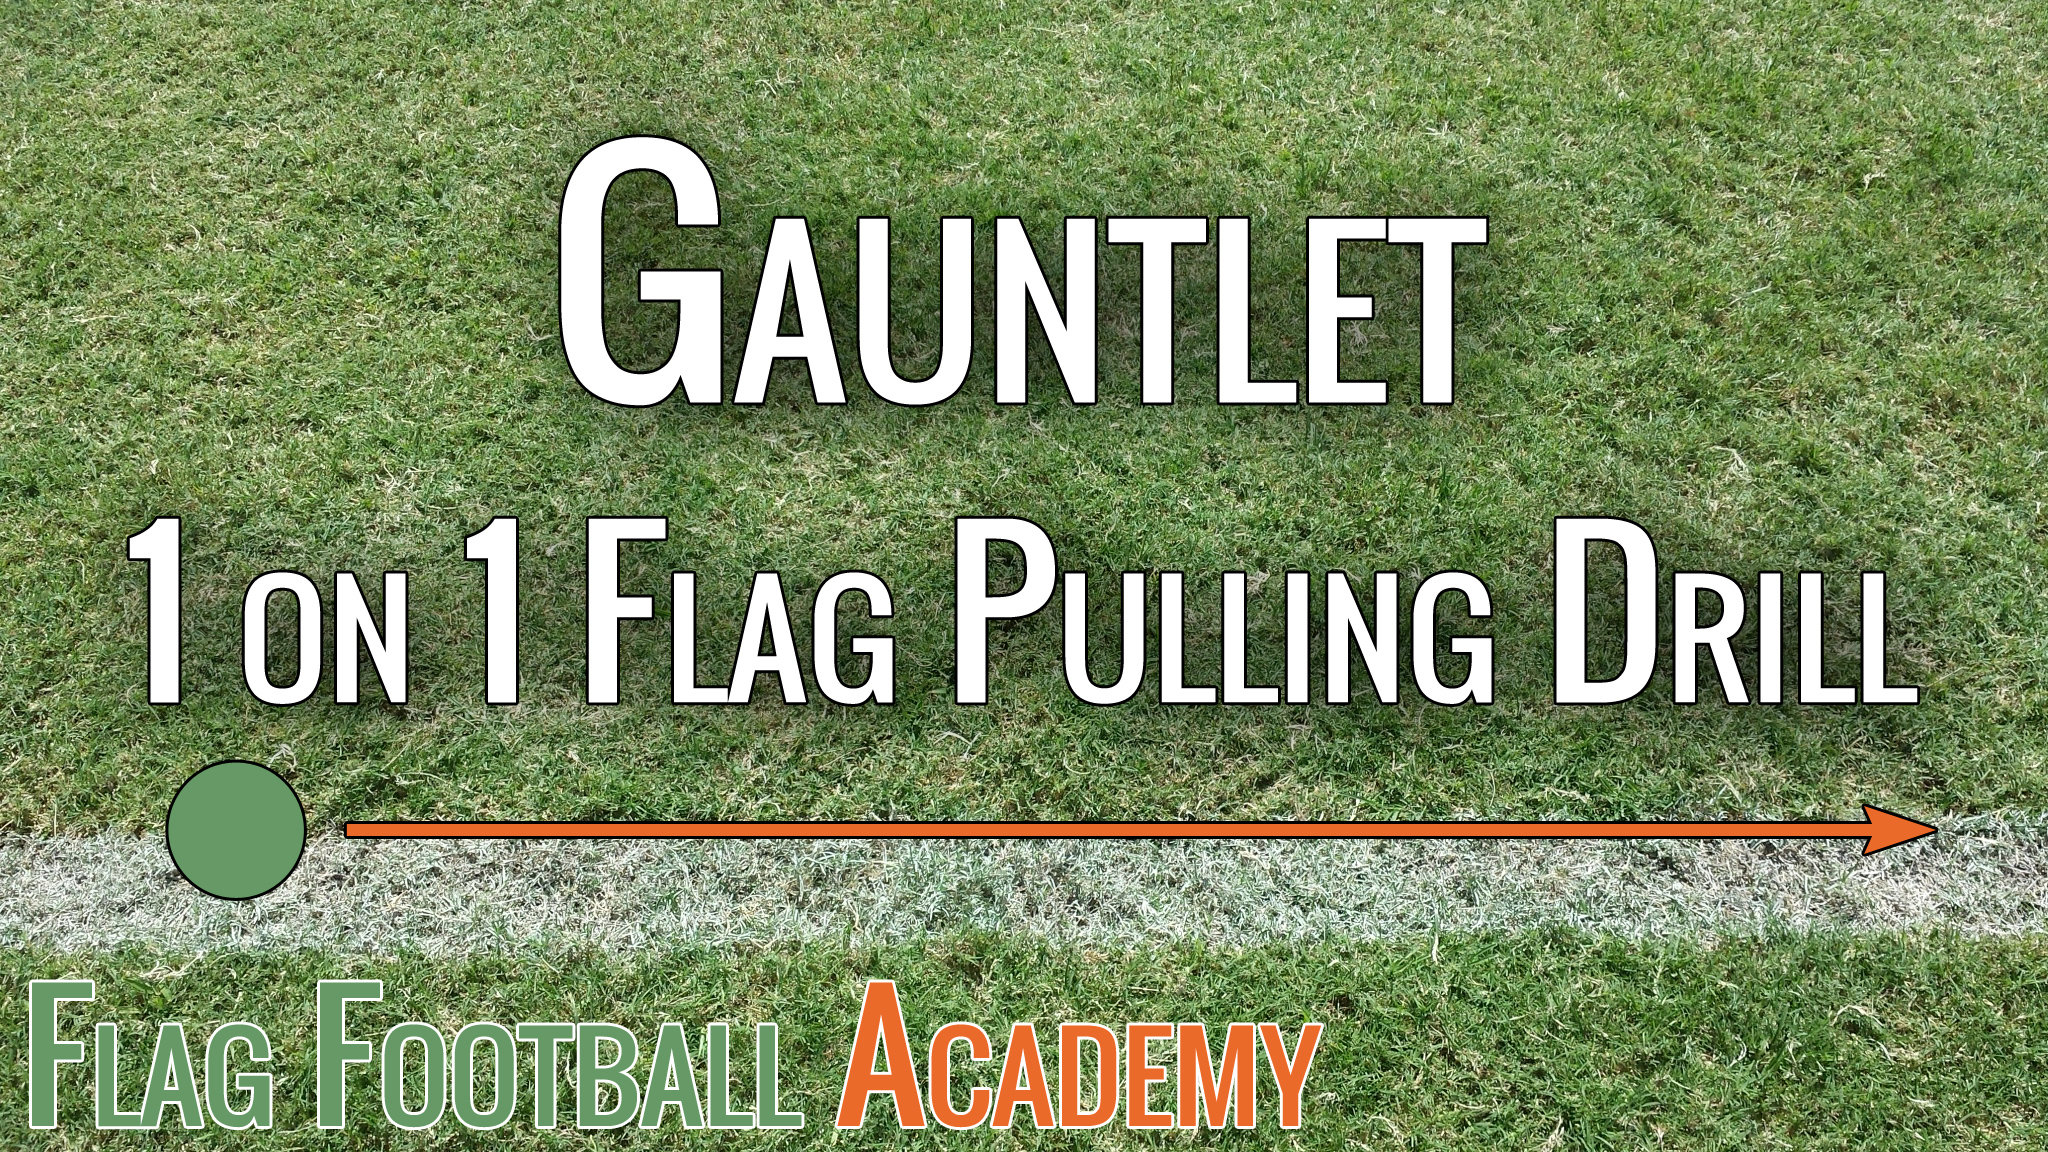 The Gauntlet – Flag Pulling Drill